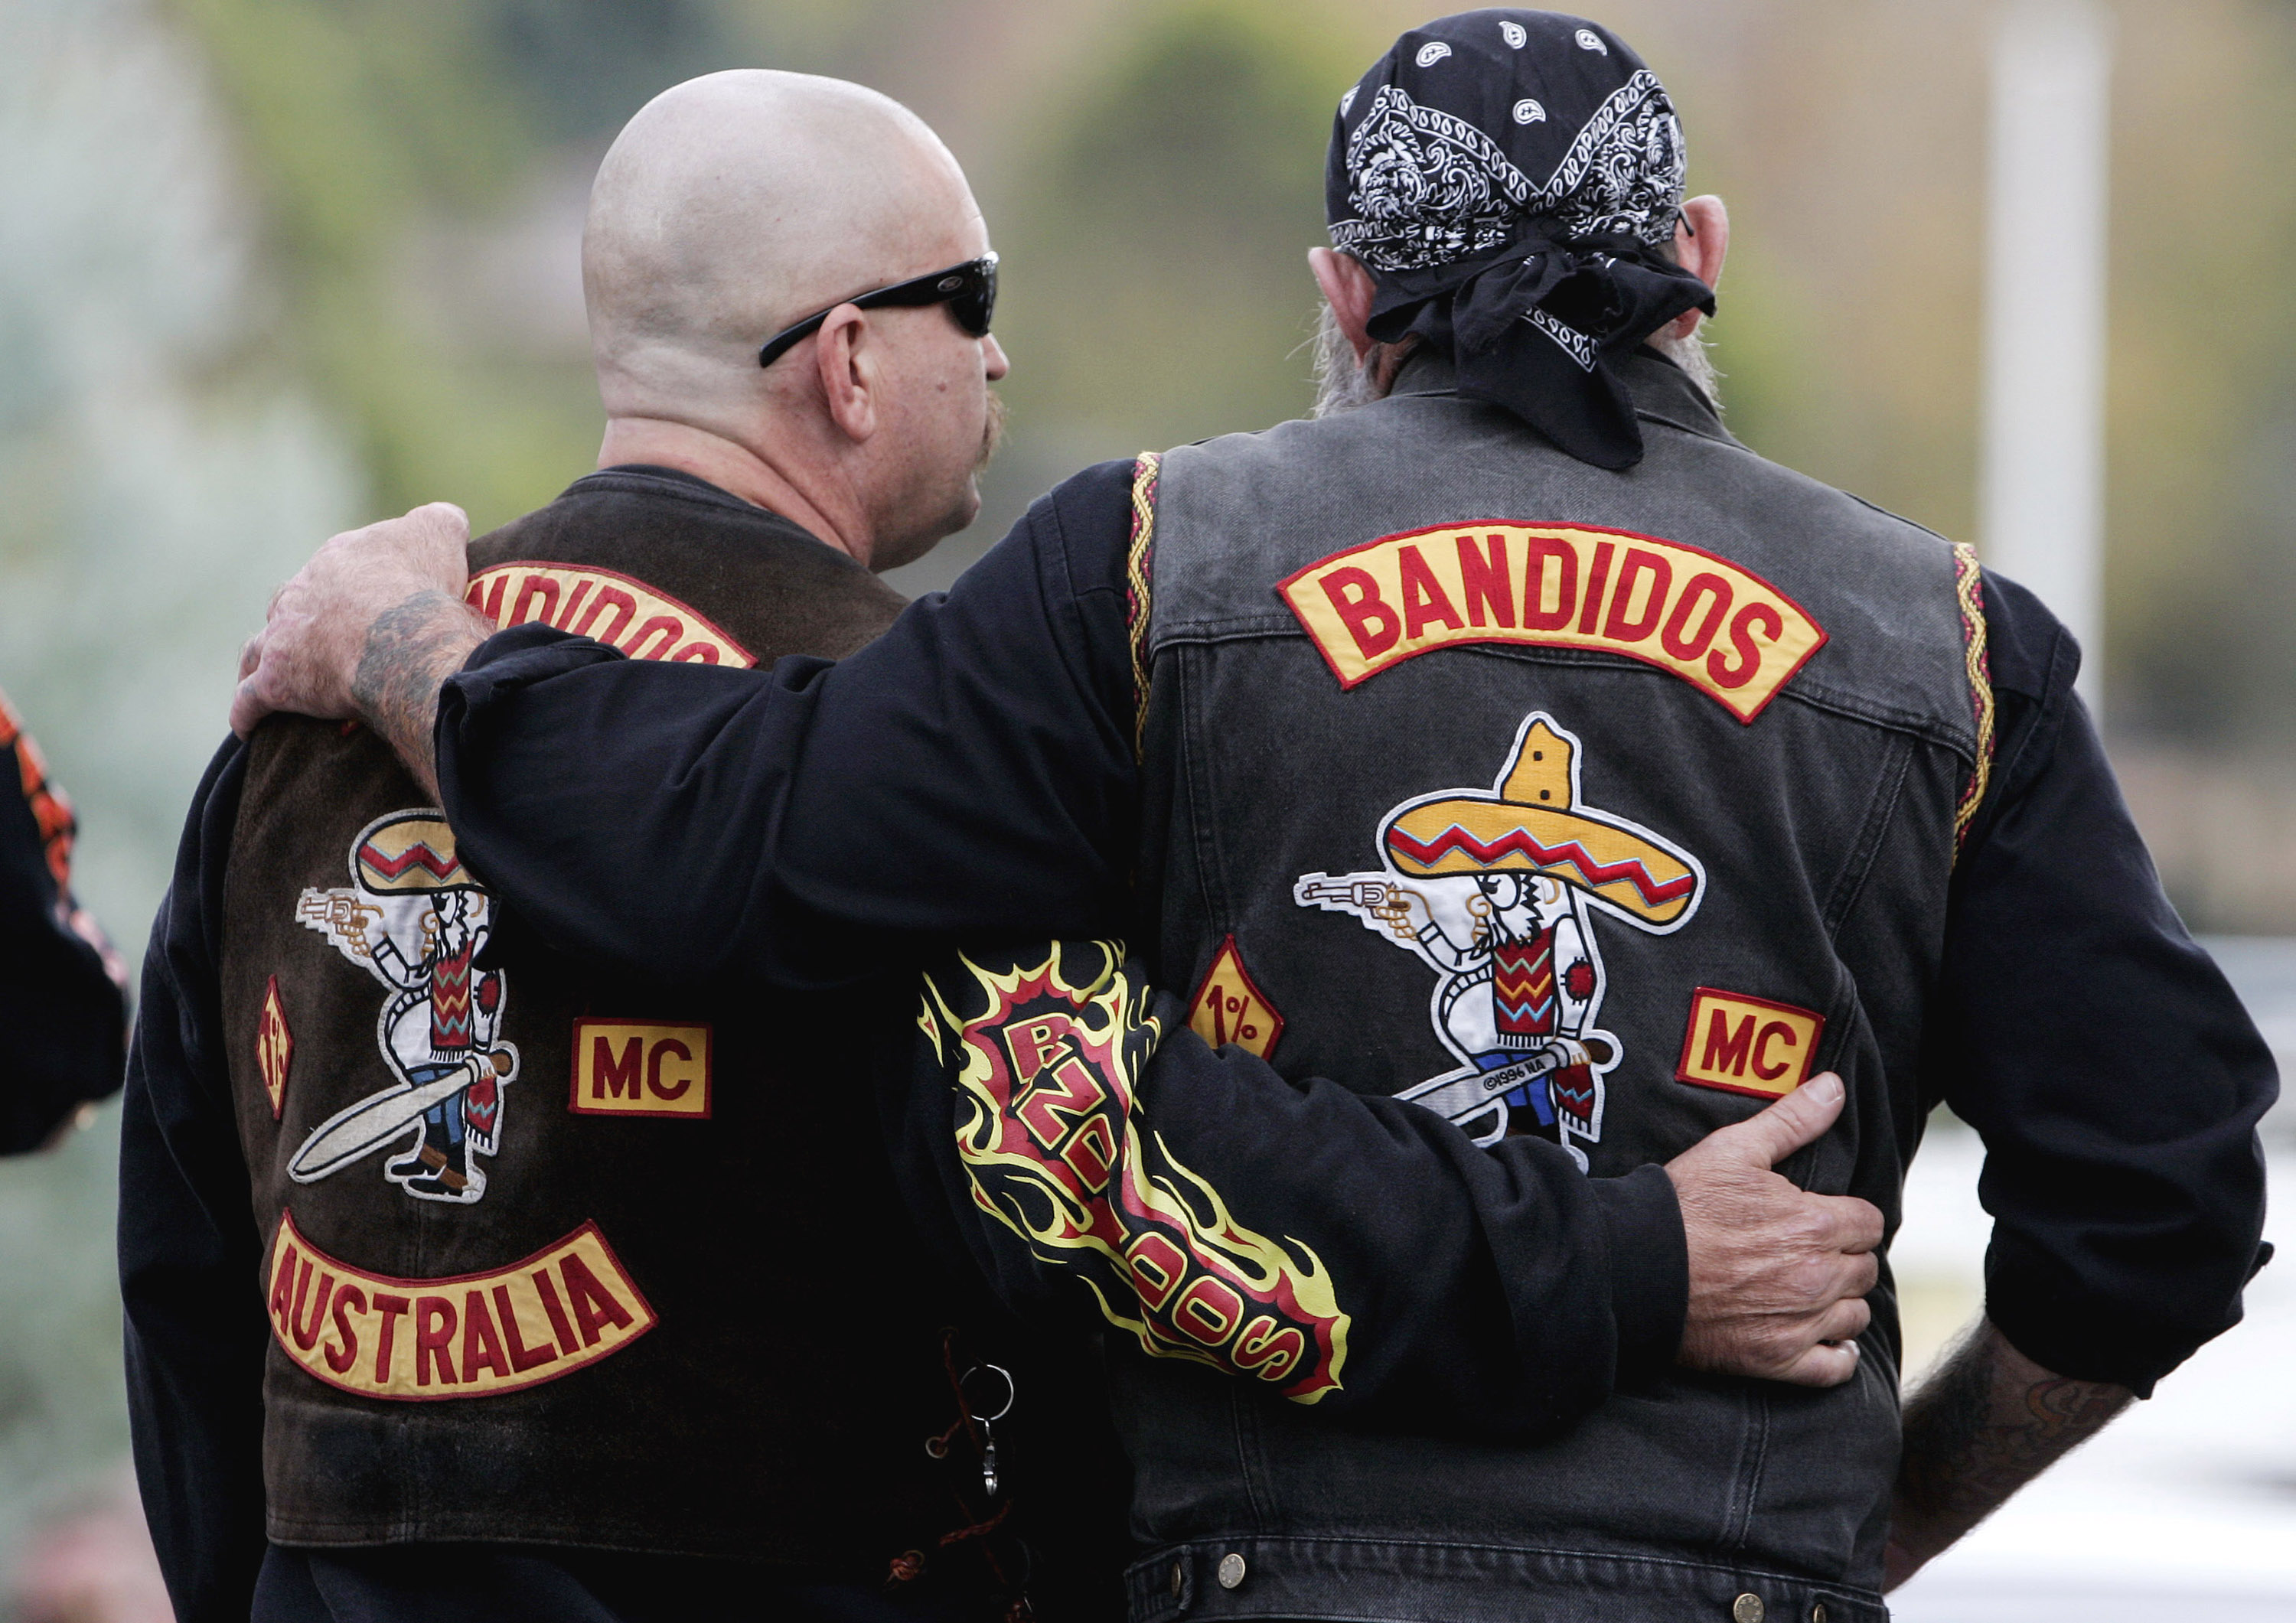 Two faces of the Bandidos: Weekend road warriors or criminal gang